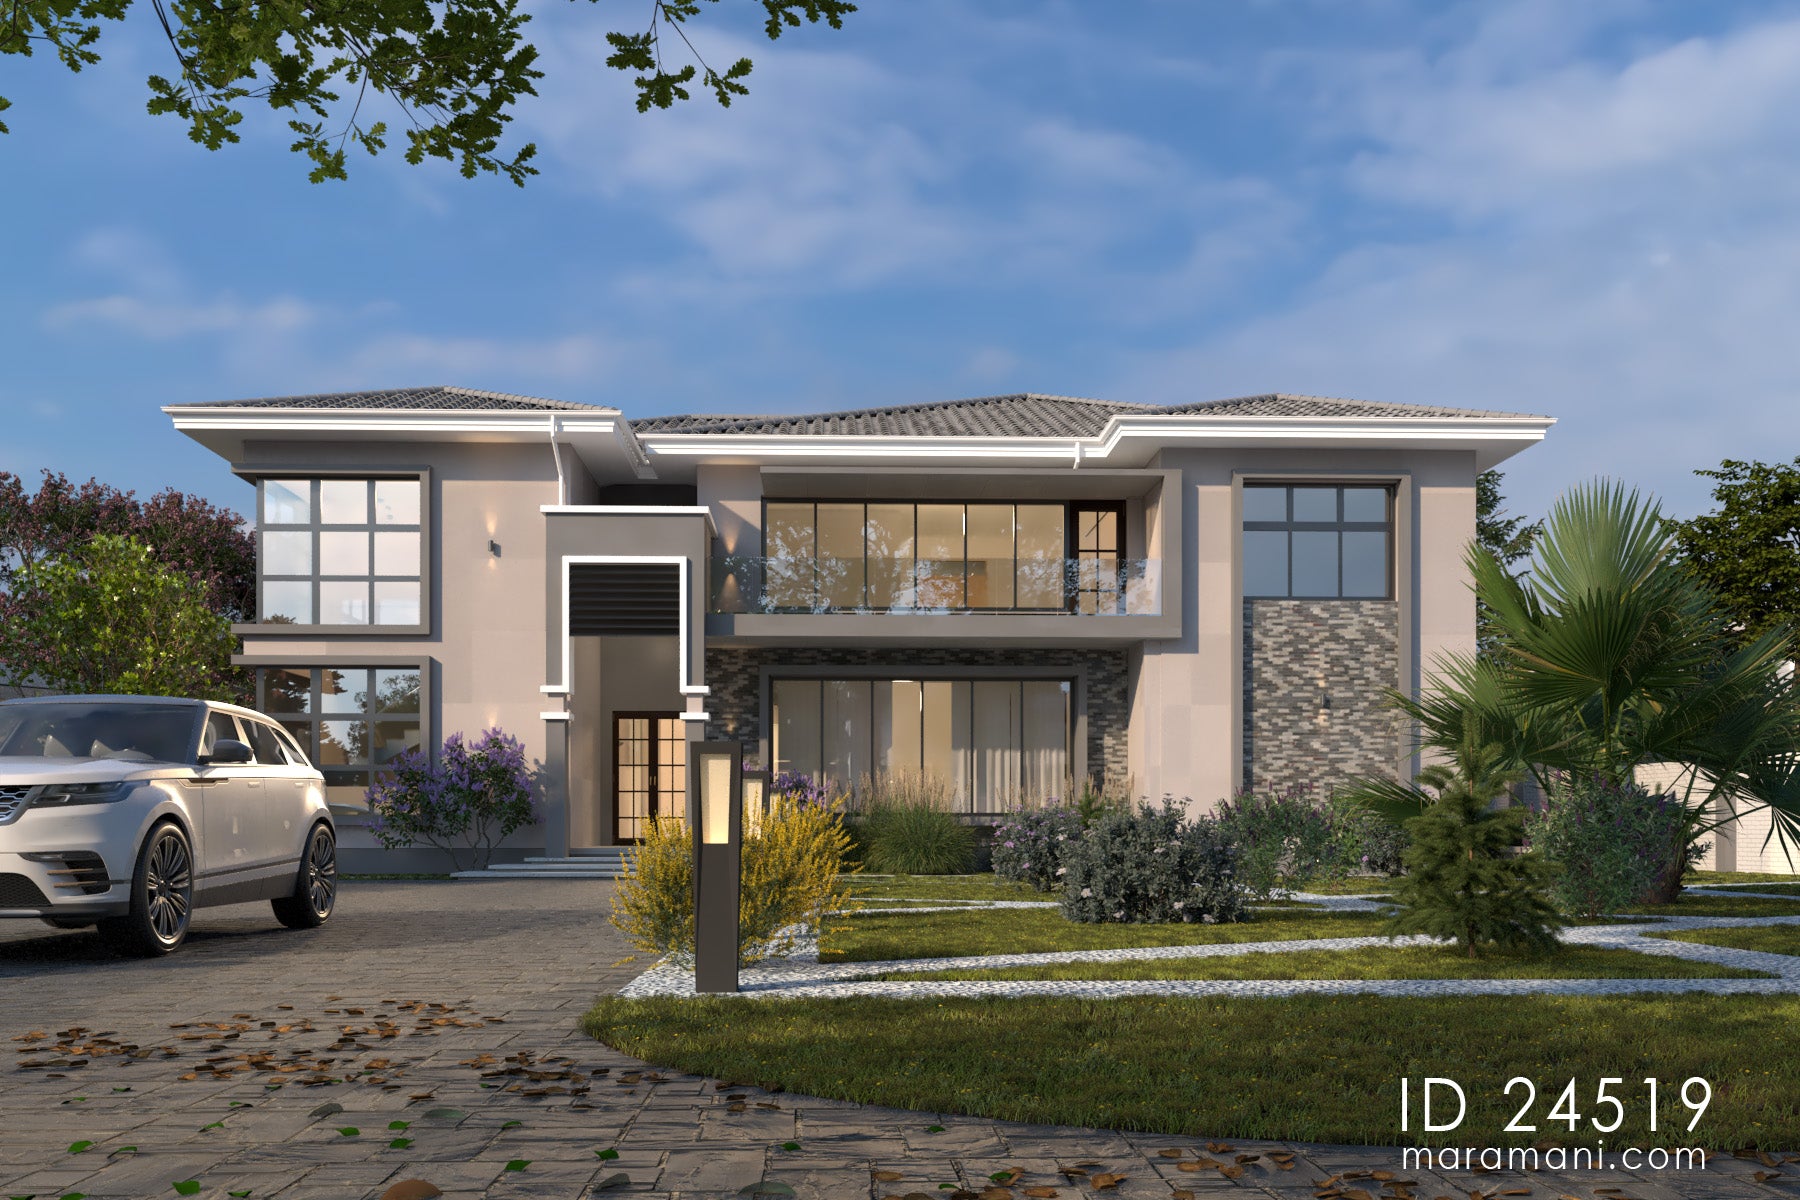 Contemporary 4-bedroom house plan - ID 24519